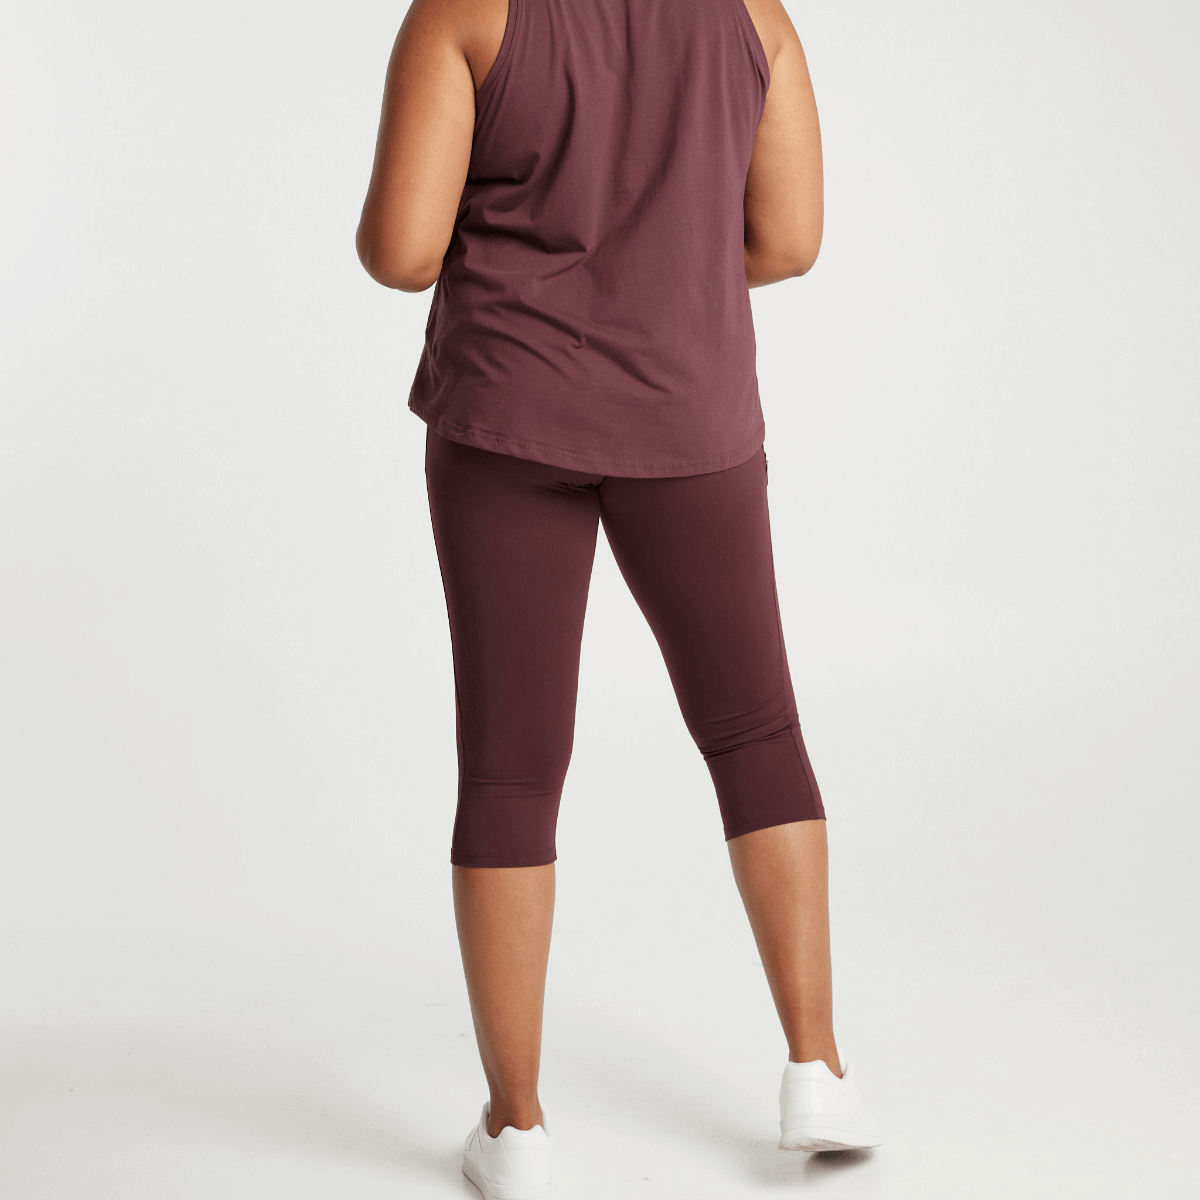 Victoria Stag Core 3/4 Length Leggings in Ox Blood front